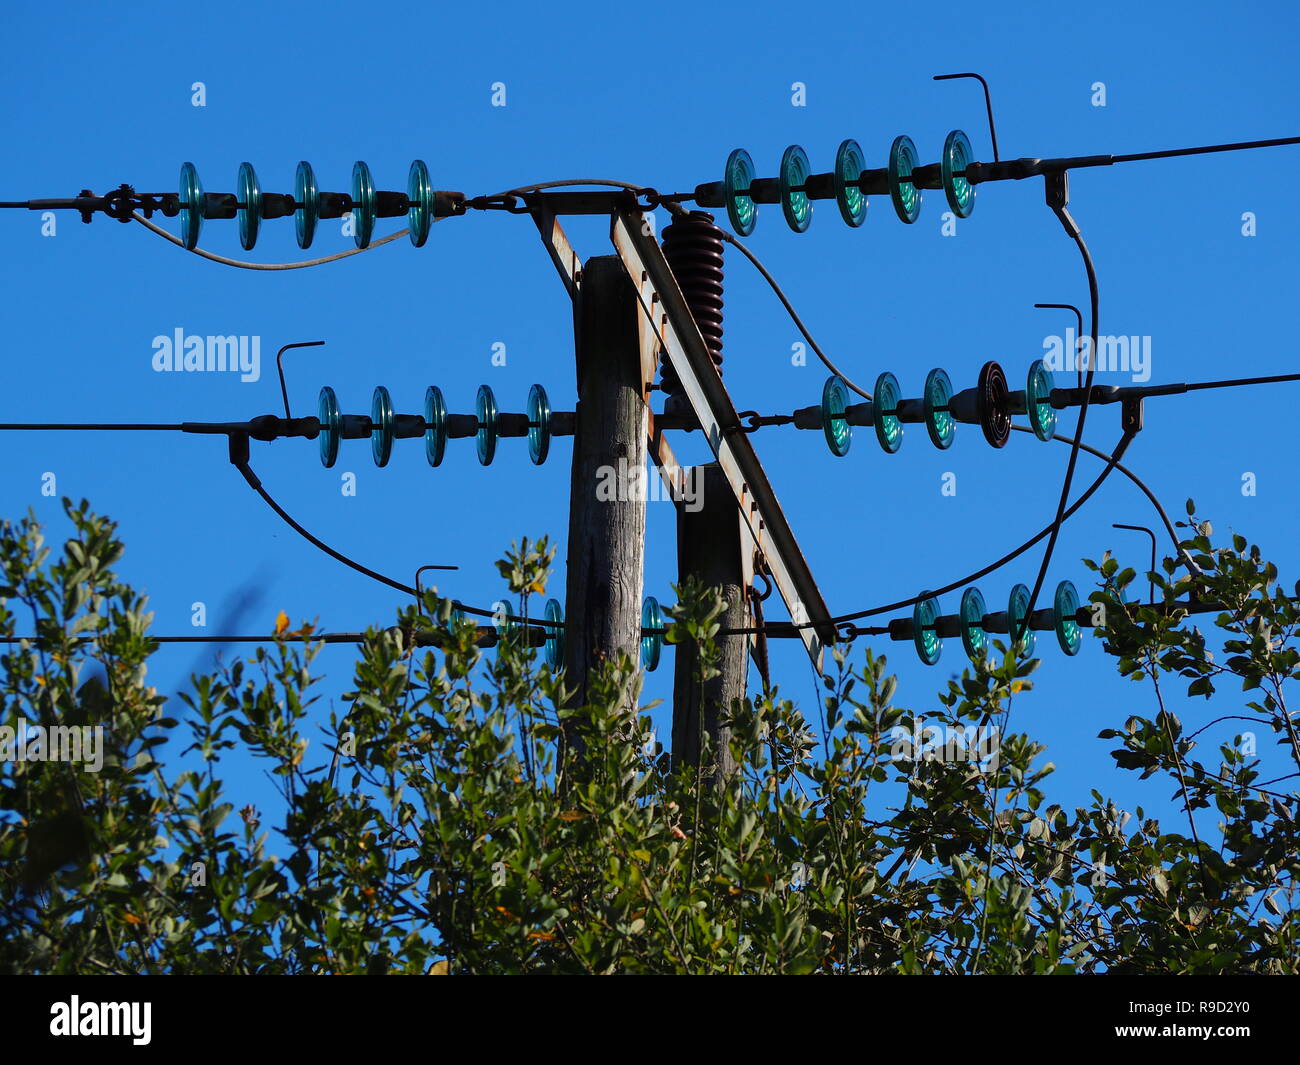 Overhead electricity power lines with blue glass insulator disks above a green hedge with a clear blue sky Stock Photo